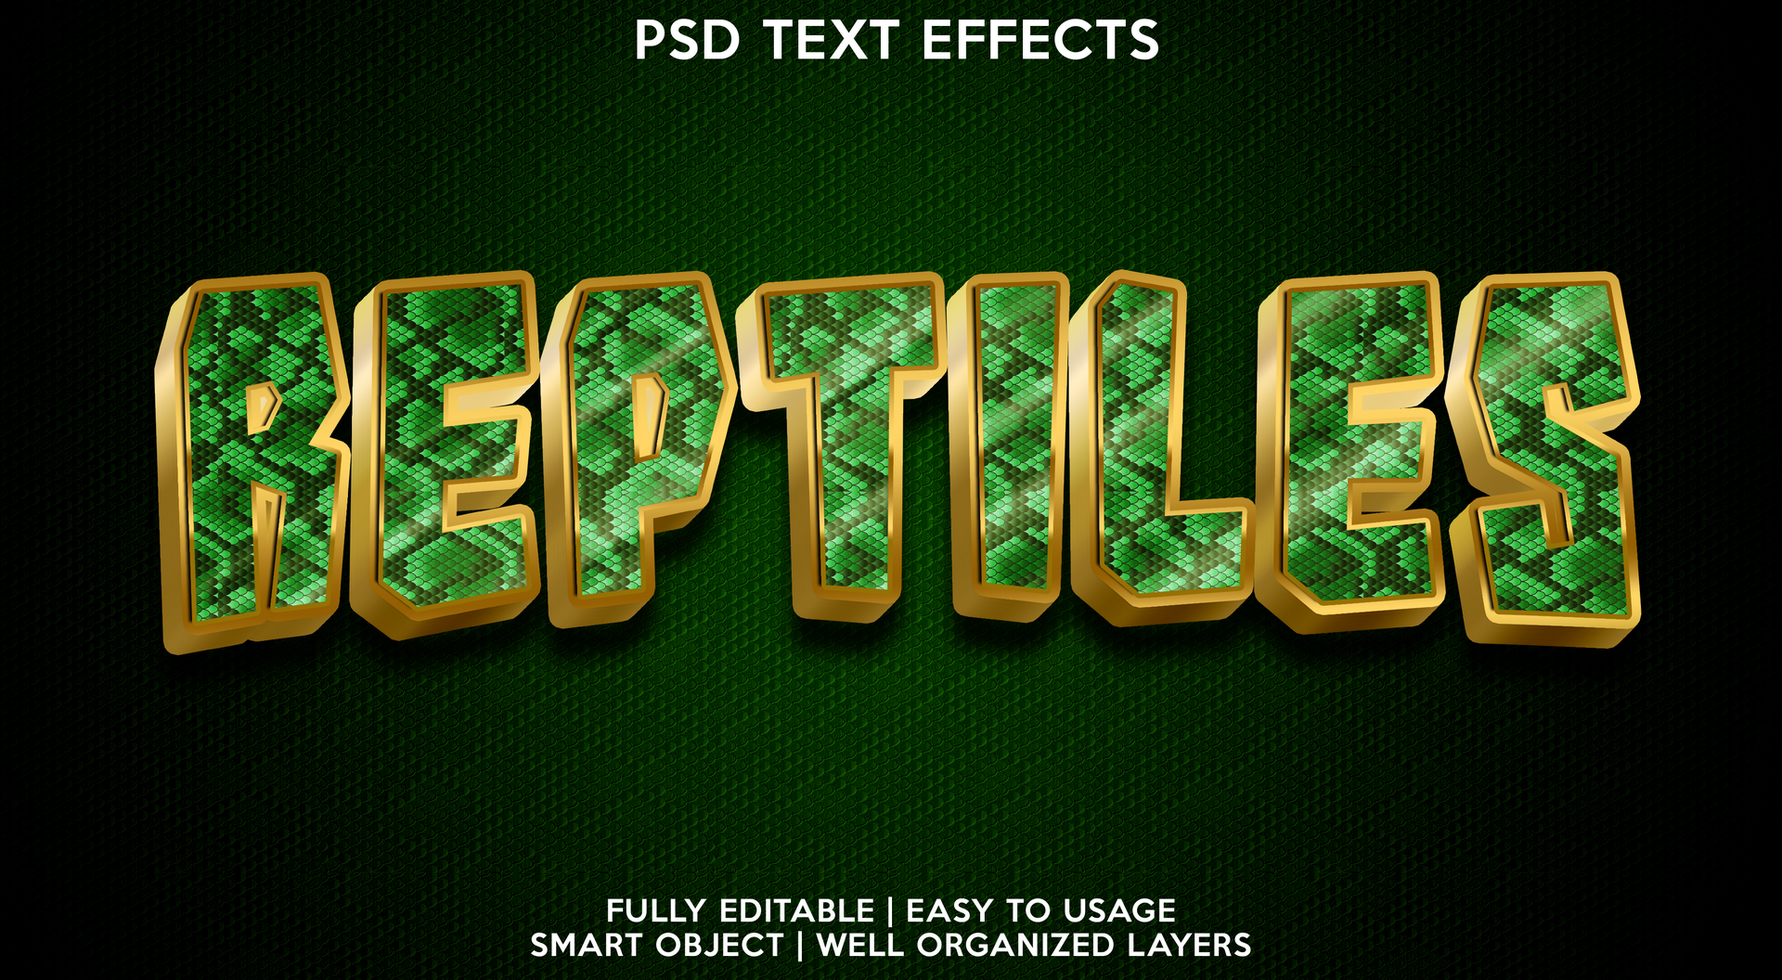 reptiles text effect template psd